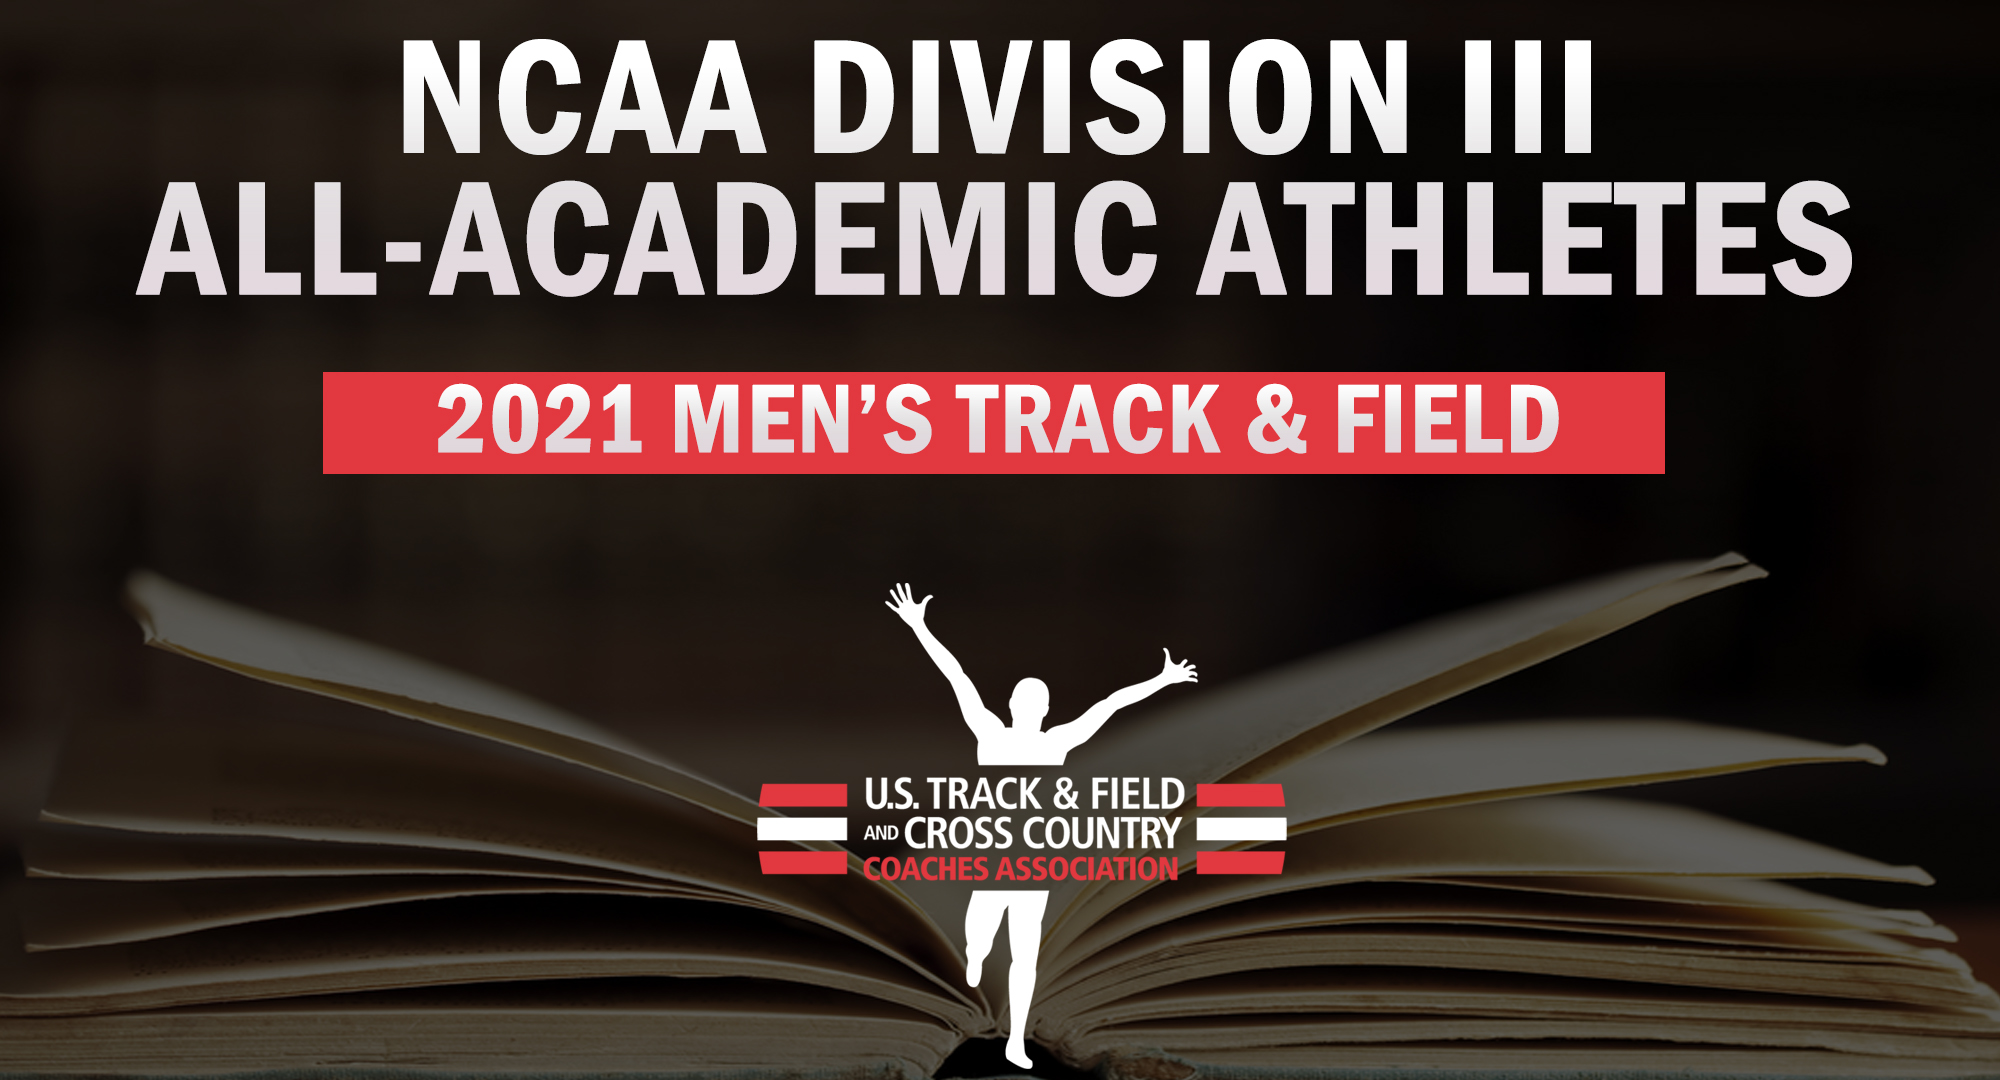 The Cobber men's track and field team earned USTFCCCA All-Academic Team honors and two student-athletes were honored with the individual award.